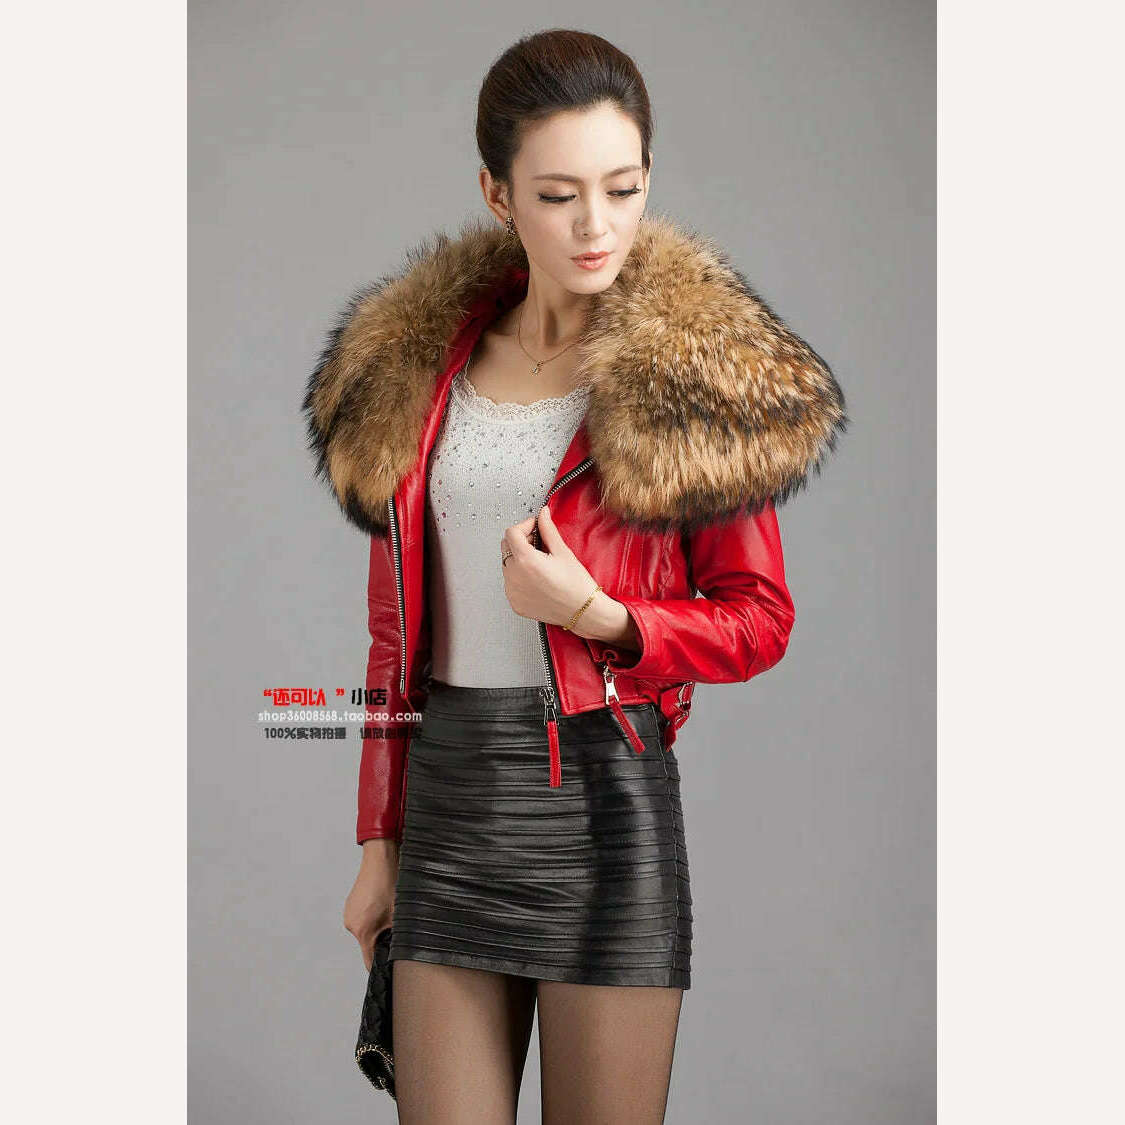 KIMLUD, Autumn Winter Women Genuine Sheepskin Leather Jacket Real Leather Coat with Ultra Large Raccoon Fur Collar Fashion Streetwear, red / S bust 86cm, KIMLUD Women's Clothes